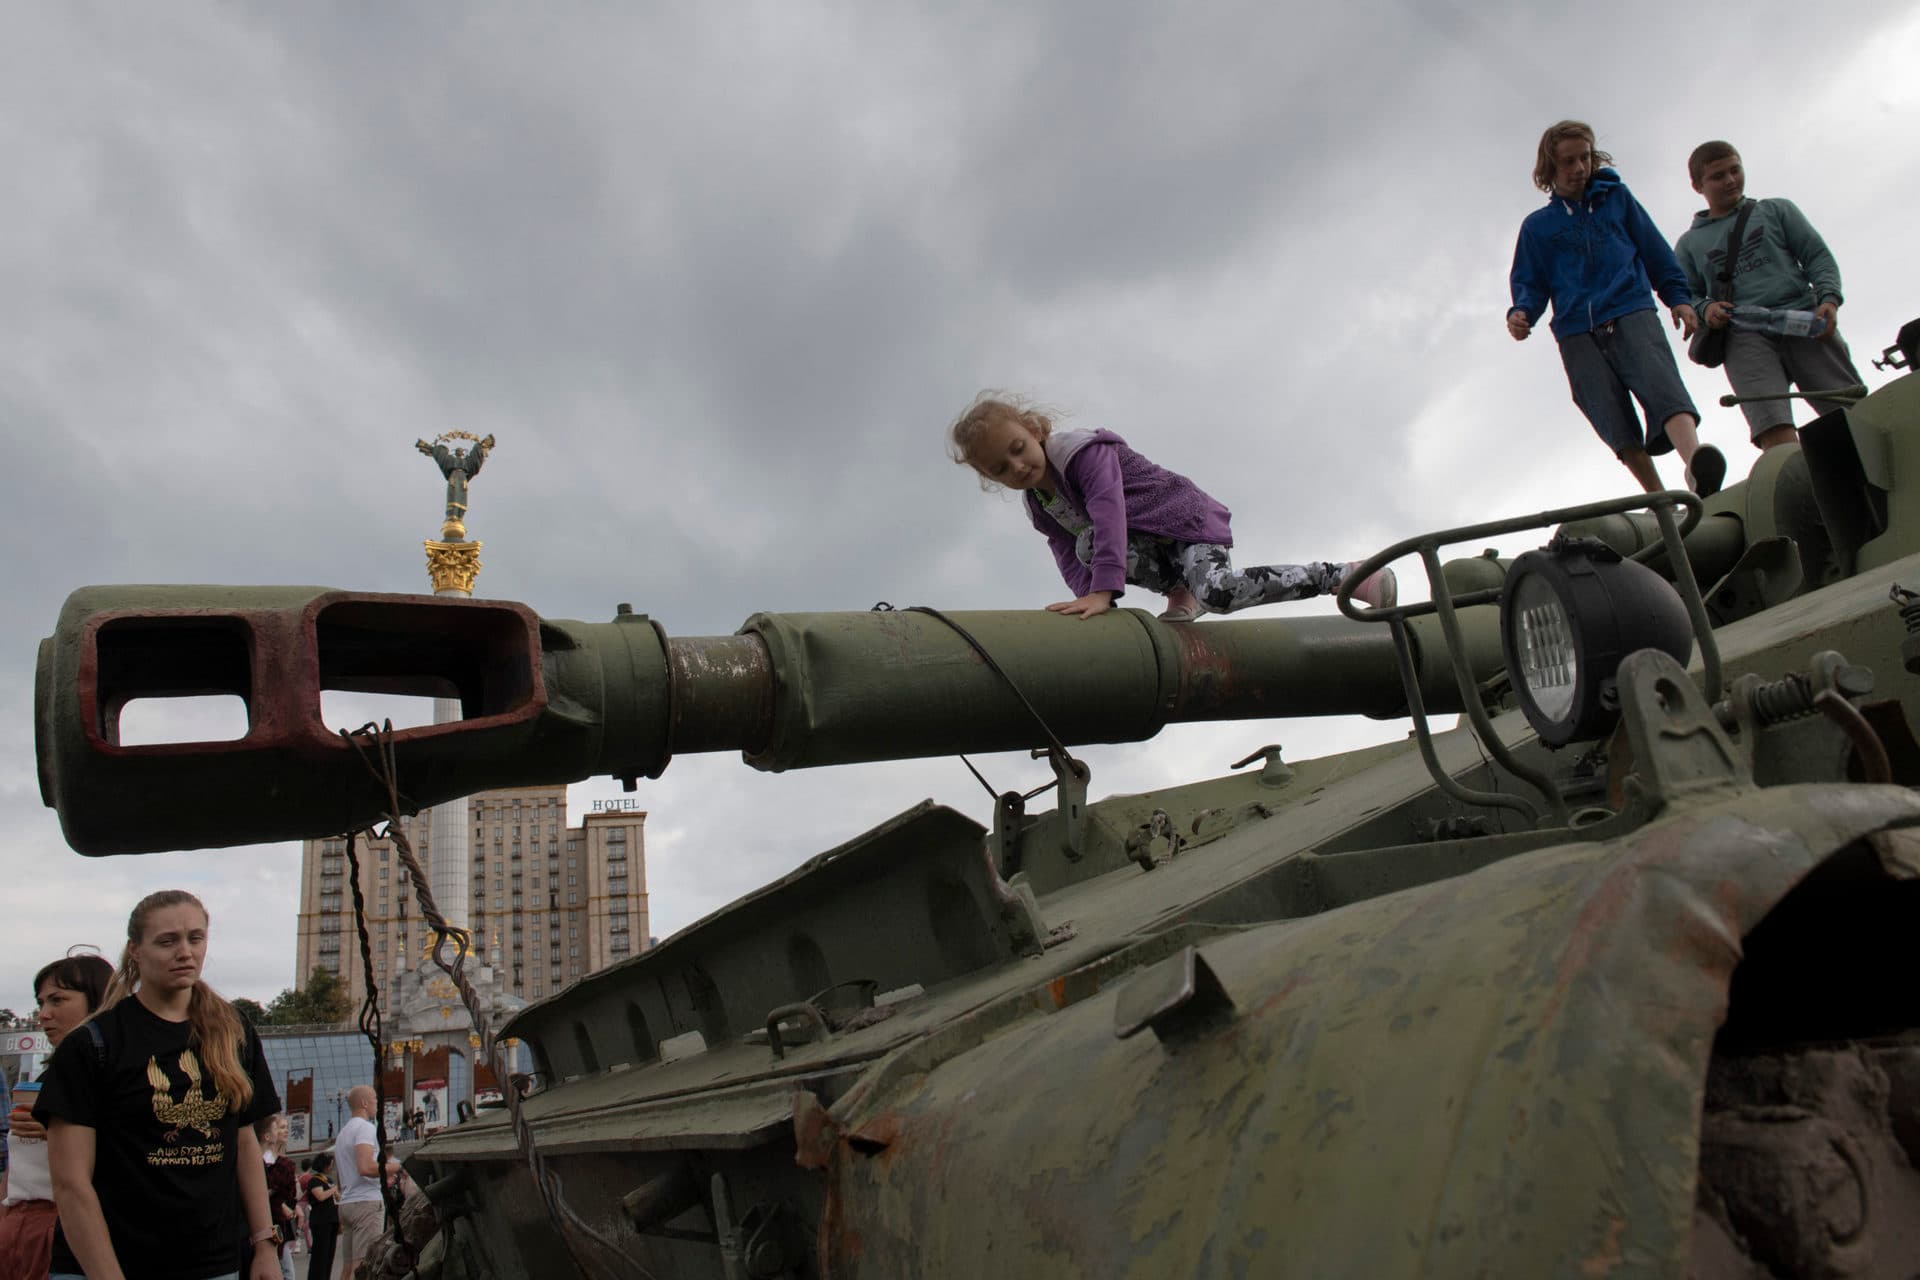 destroyed Russian military vehicles in Kyiv